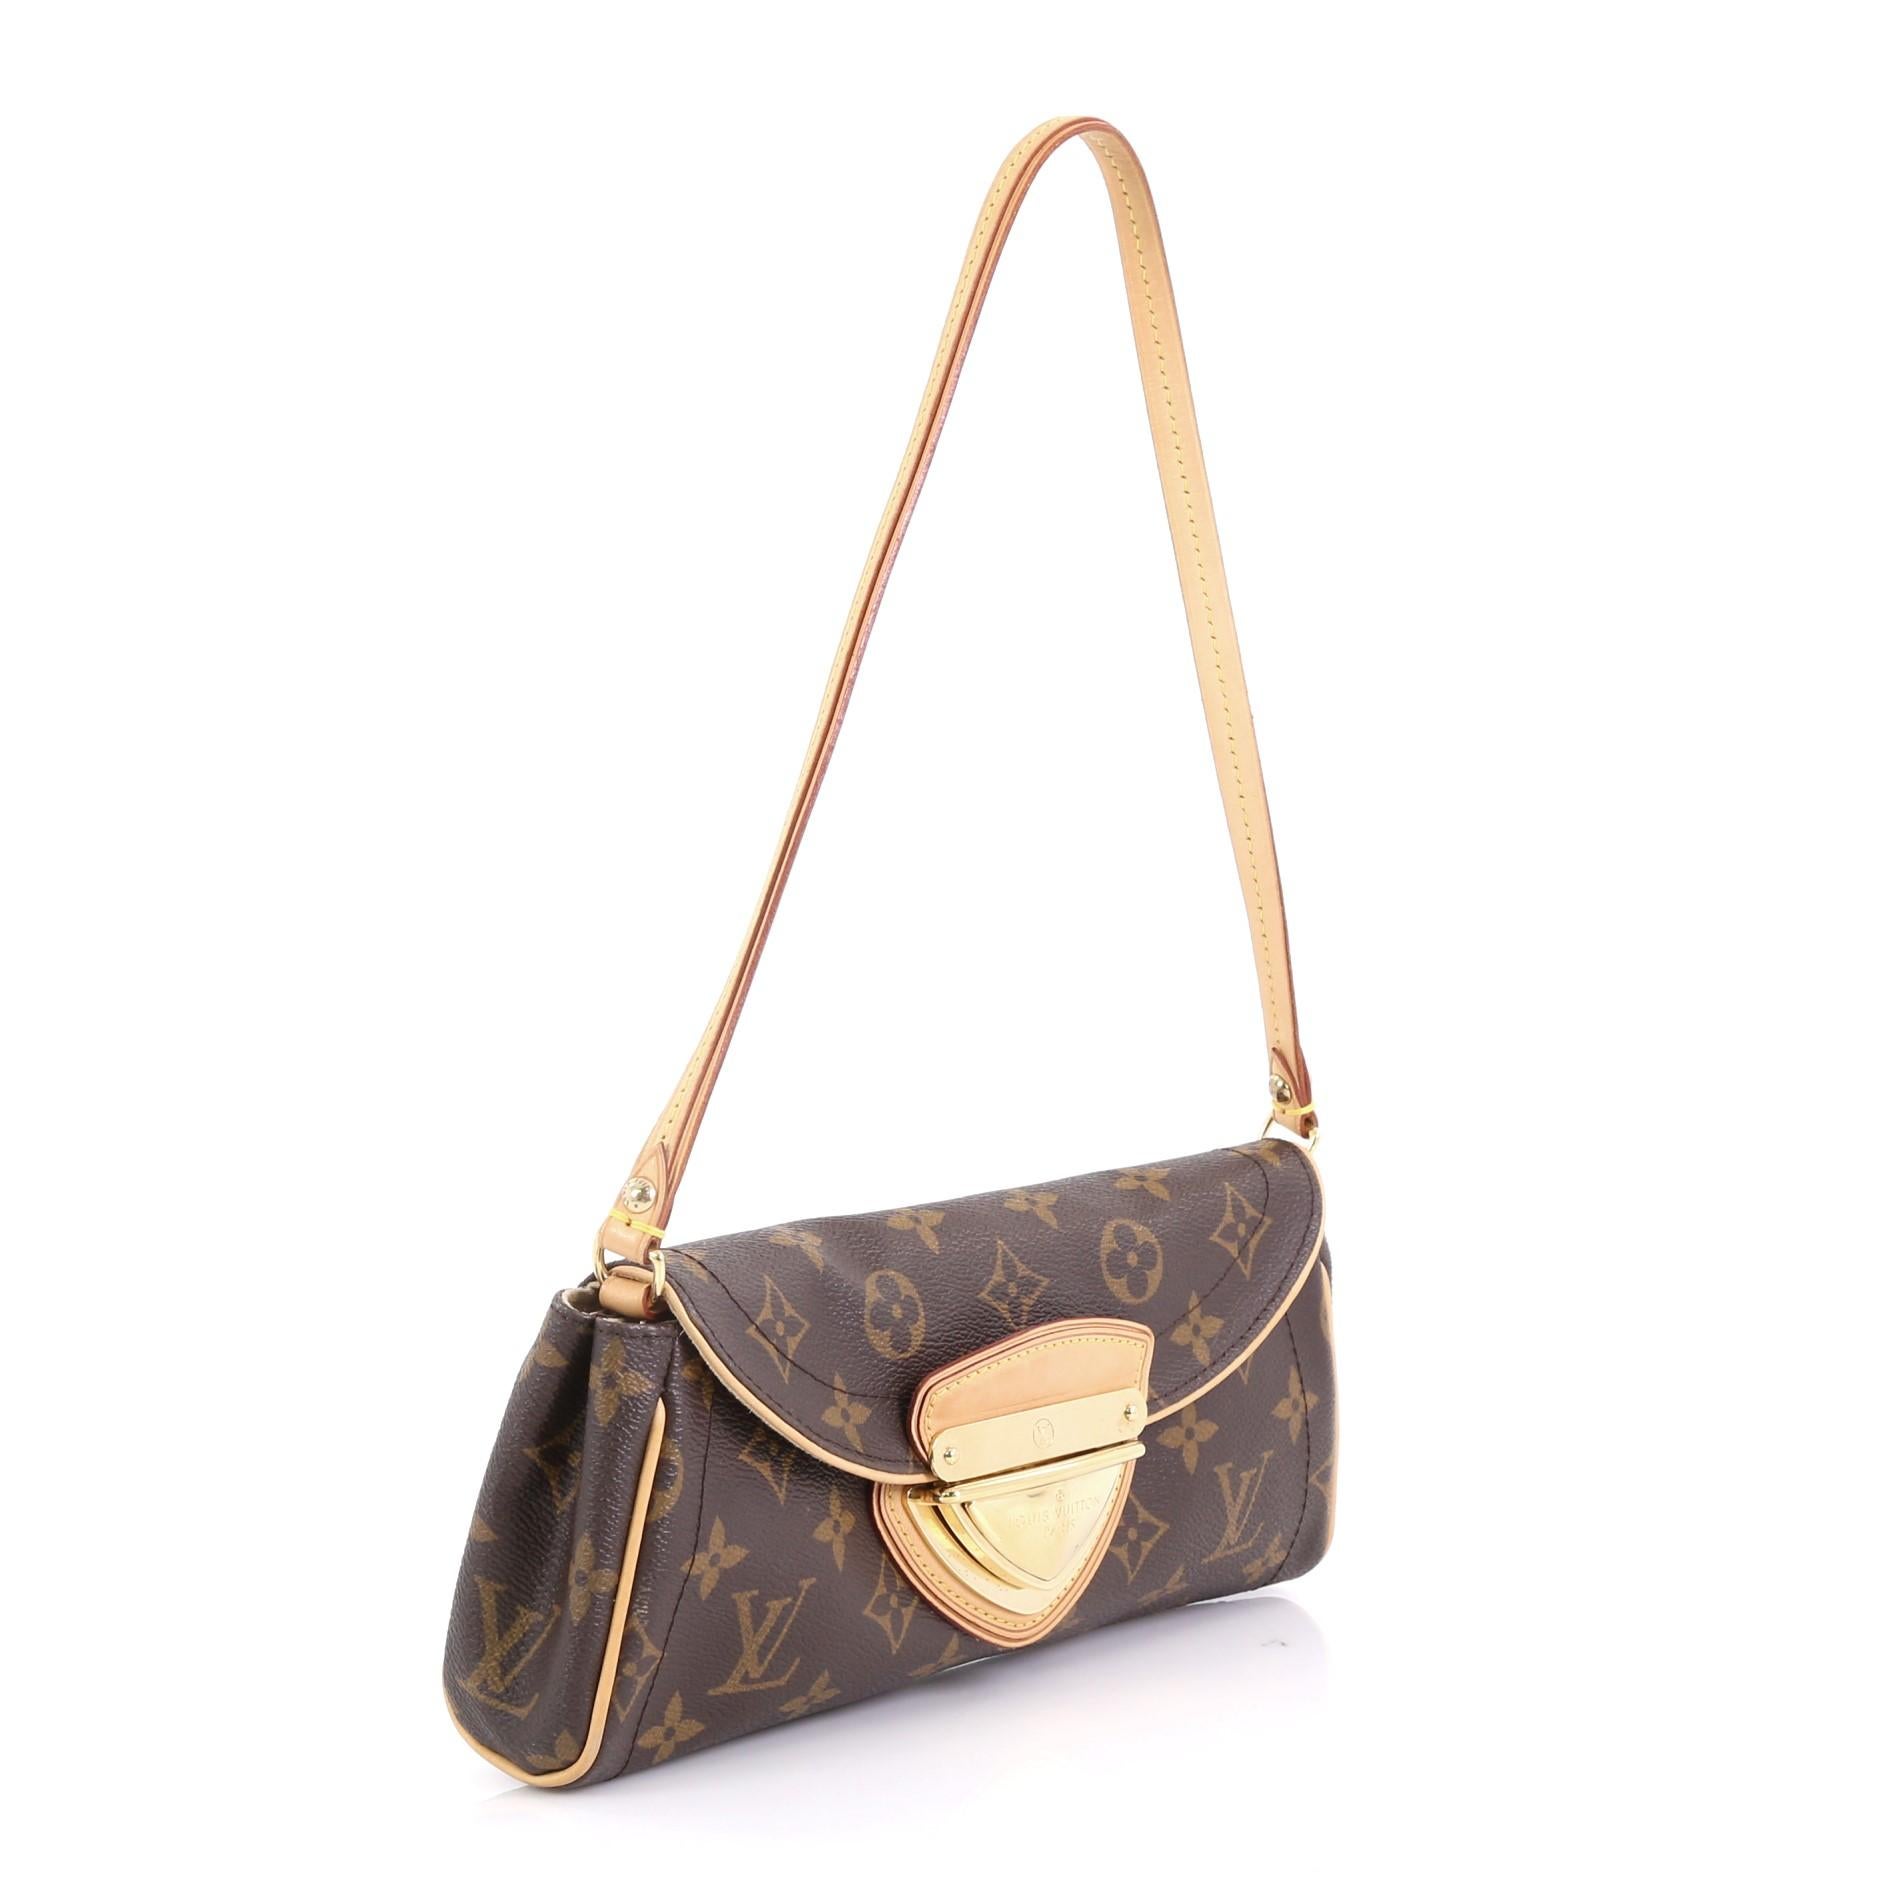 This Louis Vuitton Beverly Clutch Monogram Canvas, crafted from brown monogram coated canvas, features natural cowhide leather shoulder strap and gold-tone hardware. Its oversized push-lock closure opens to a neutral microfiber interior with slip